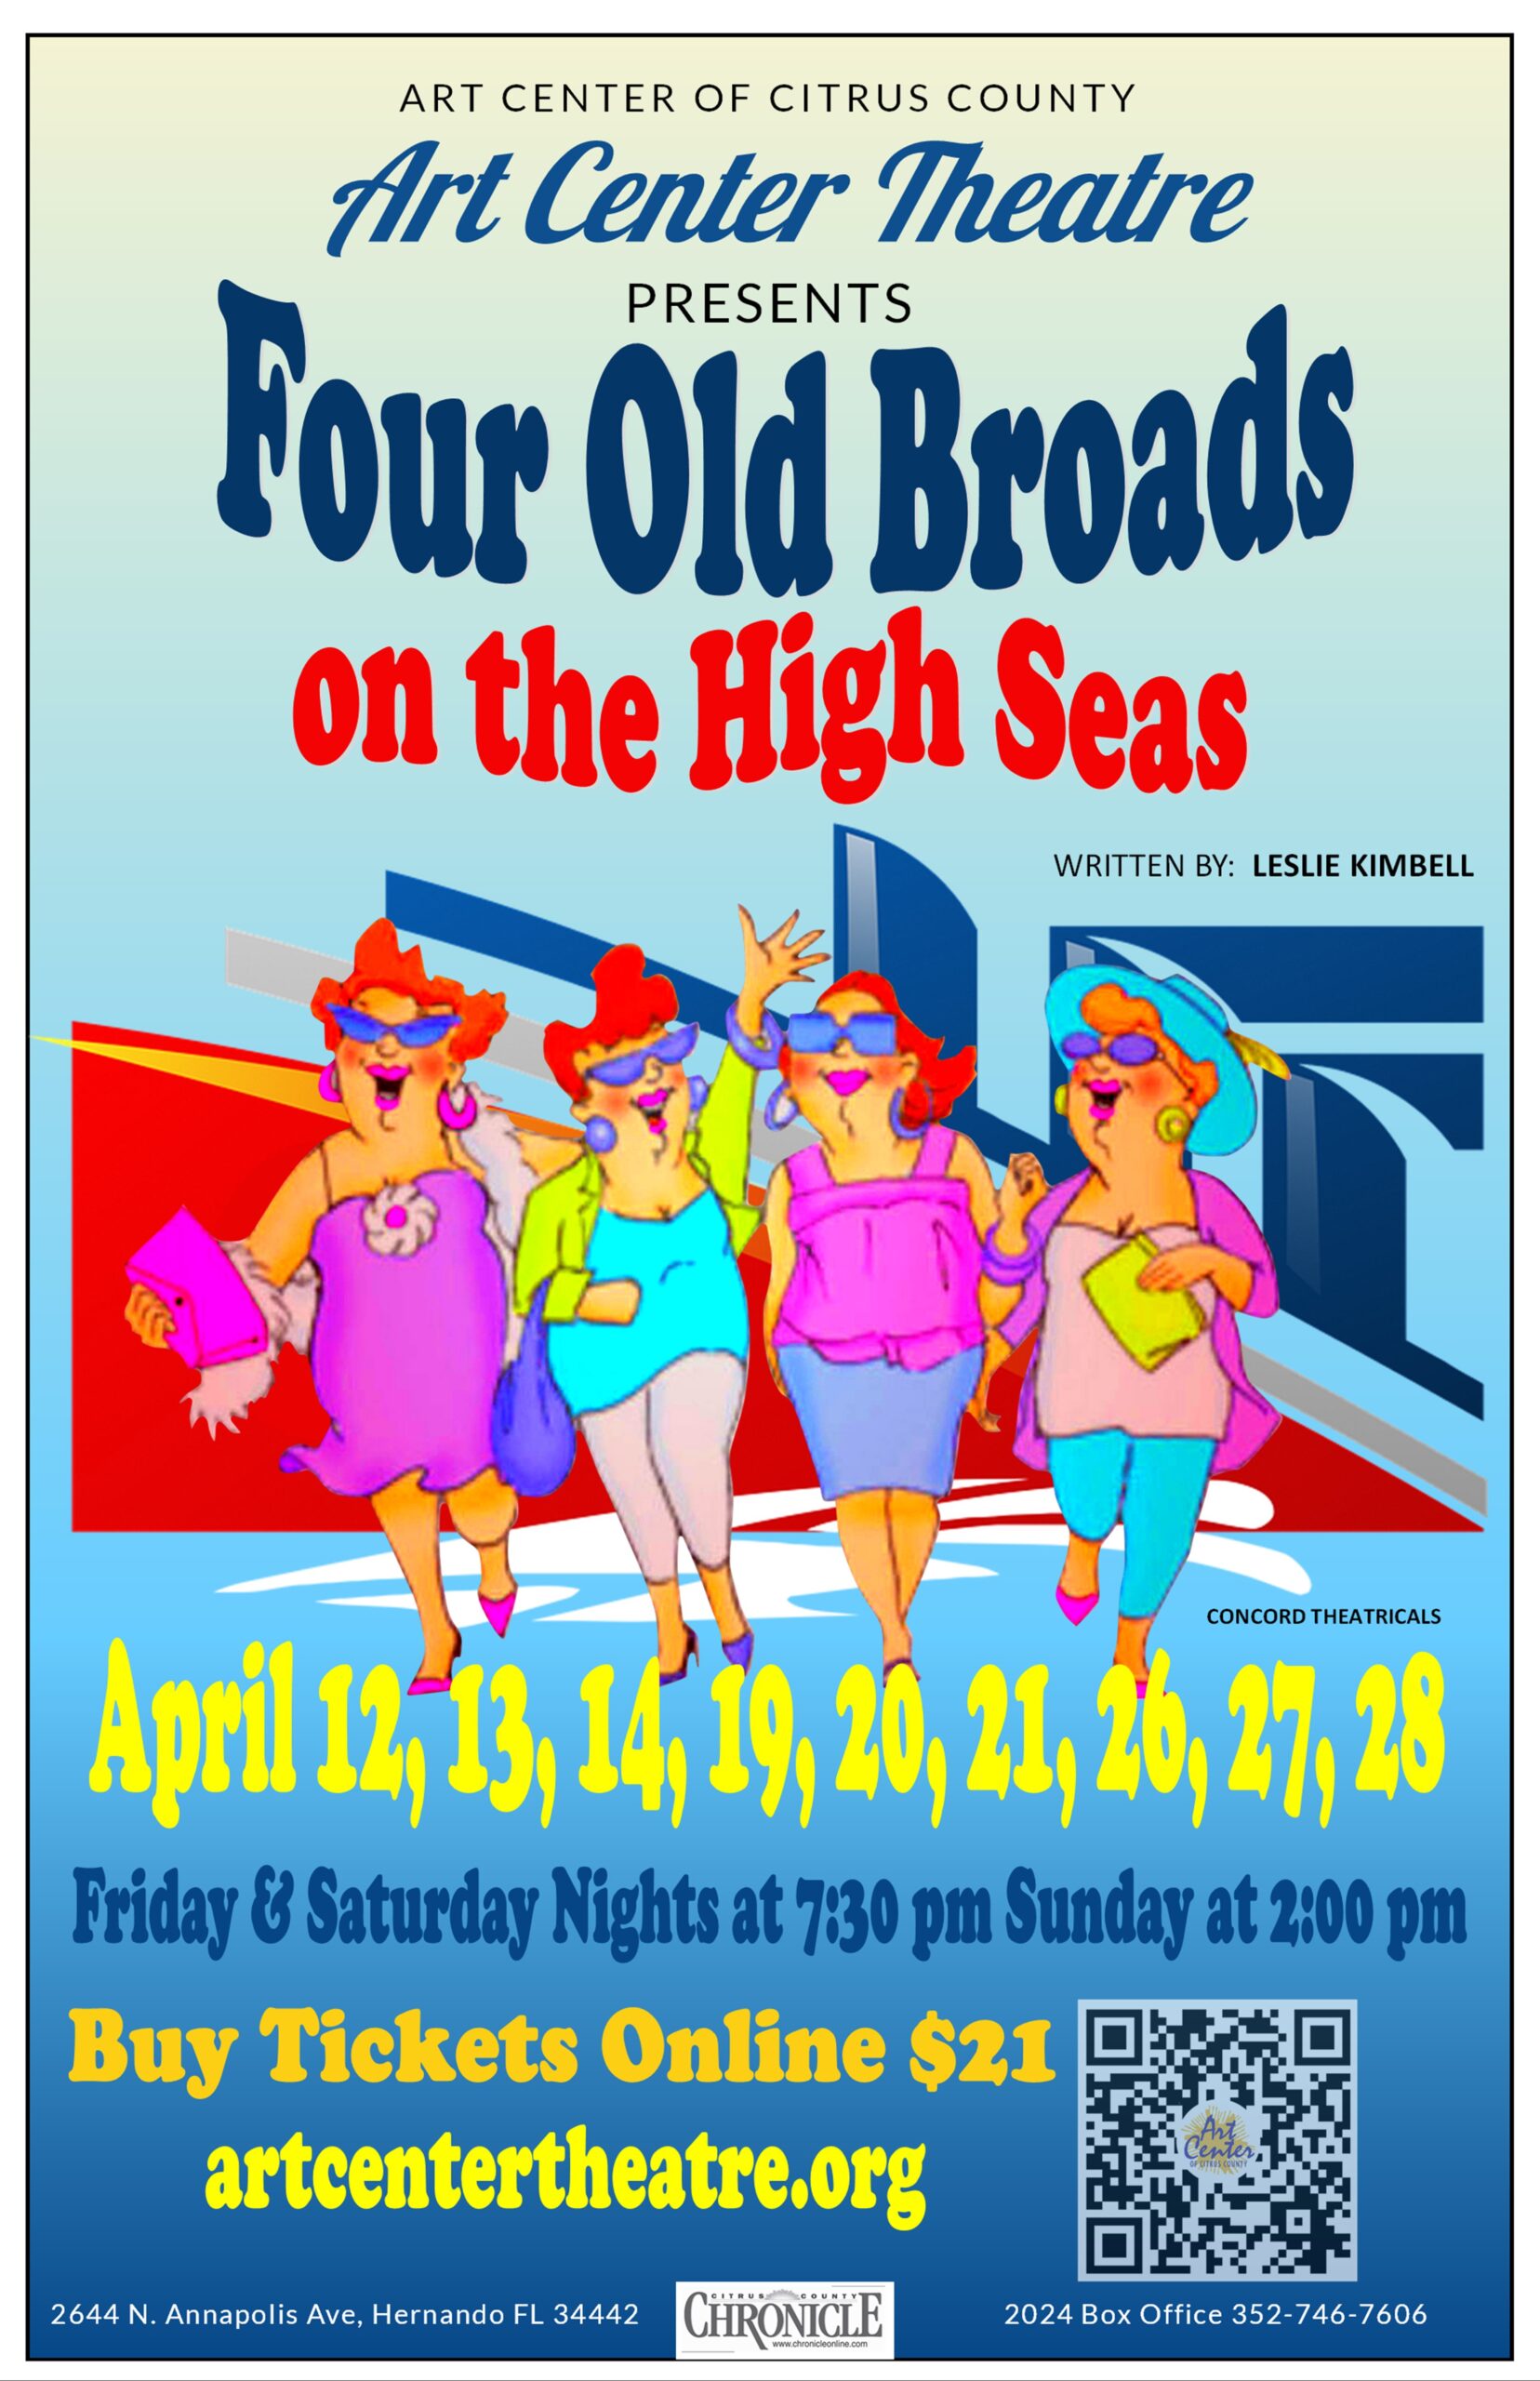 Art Center Theatre Presents: Four Old Broads on the High Seas